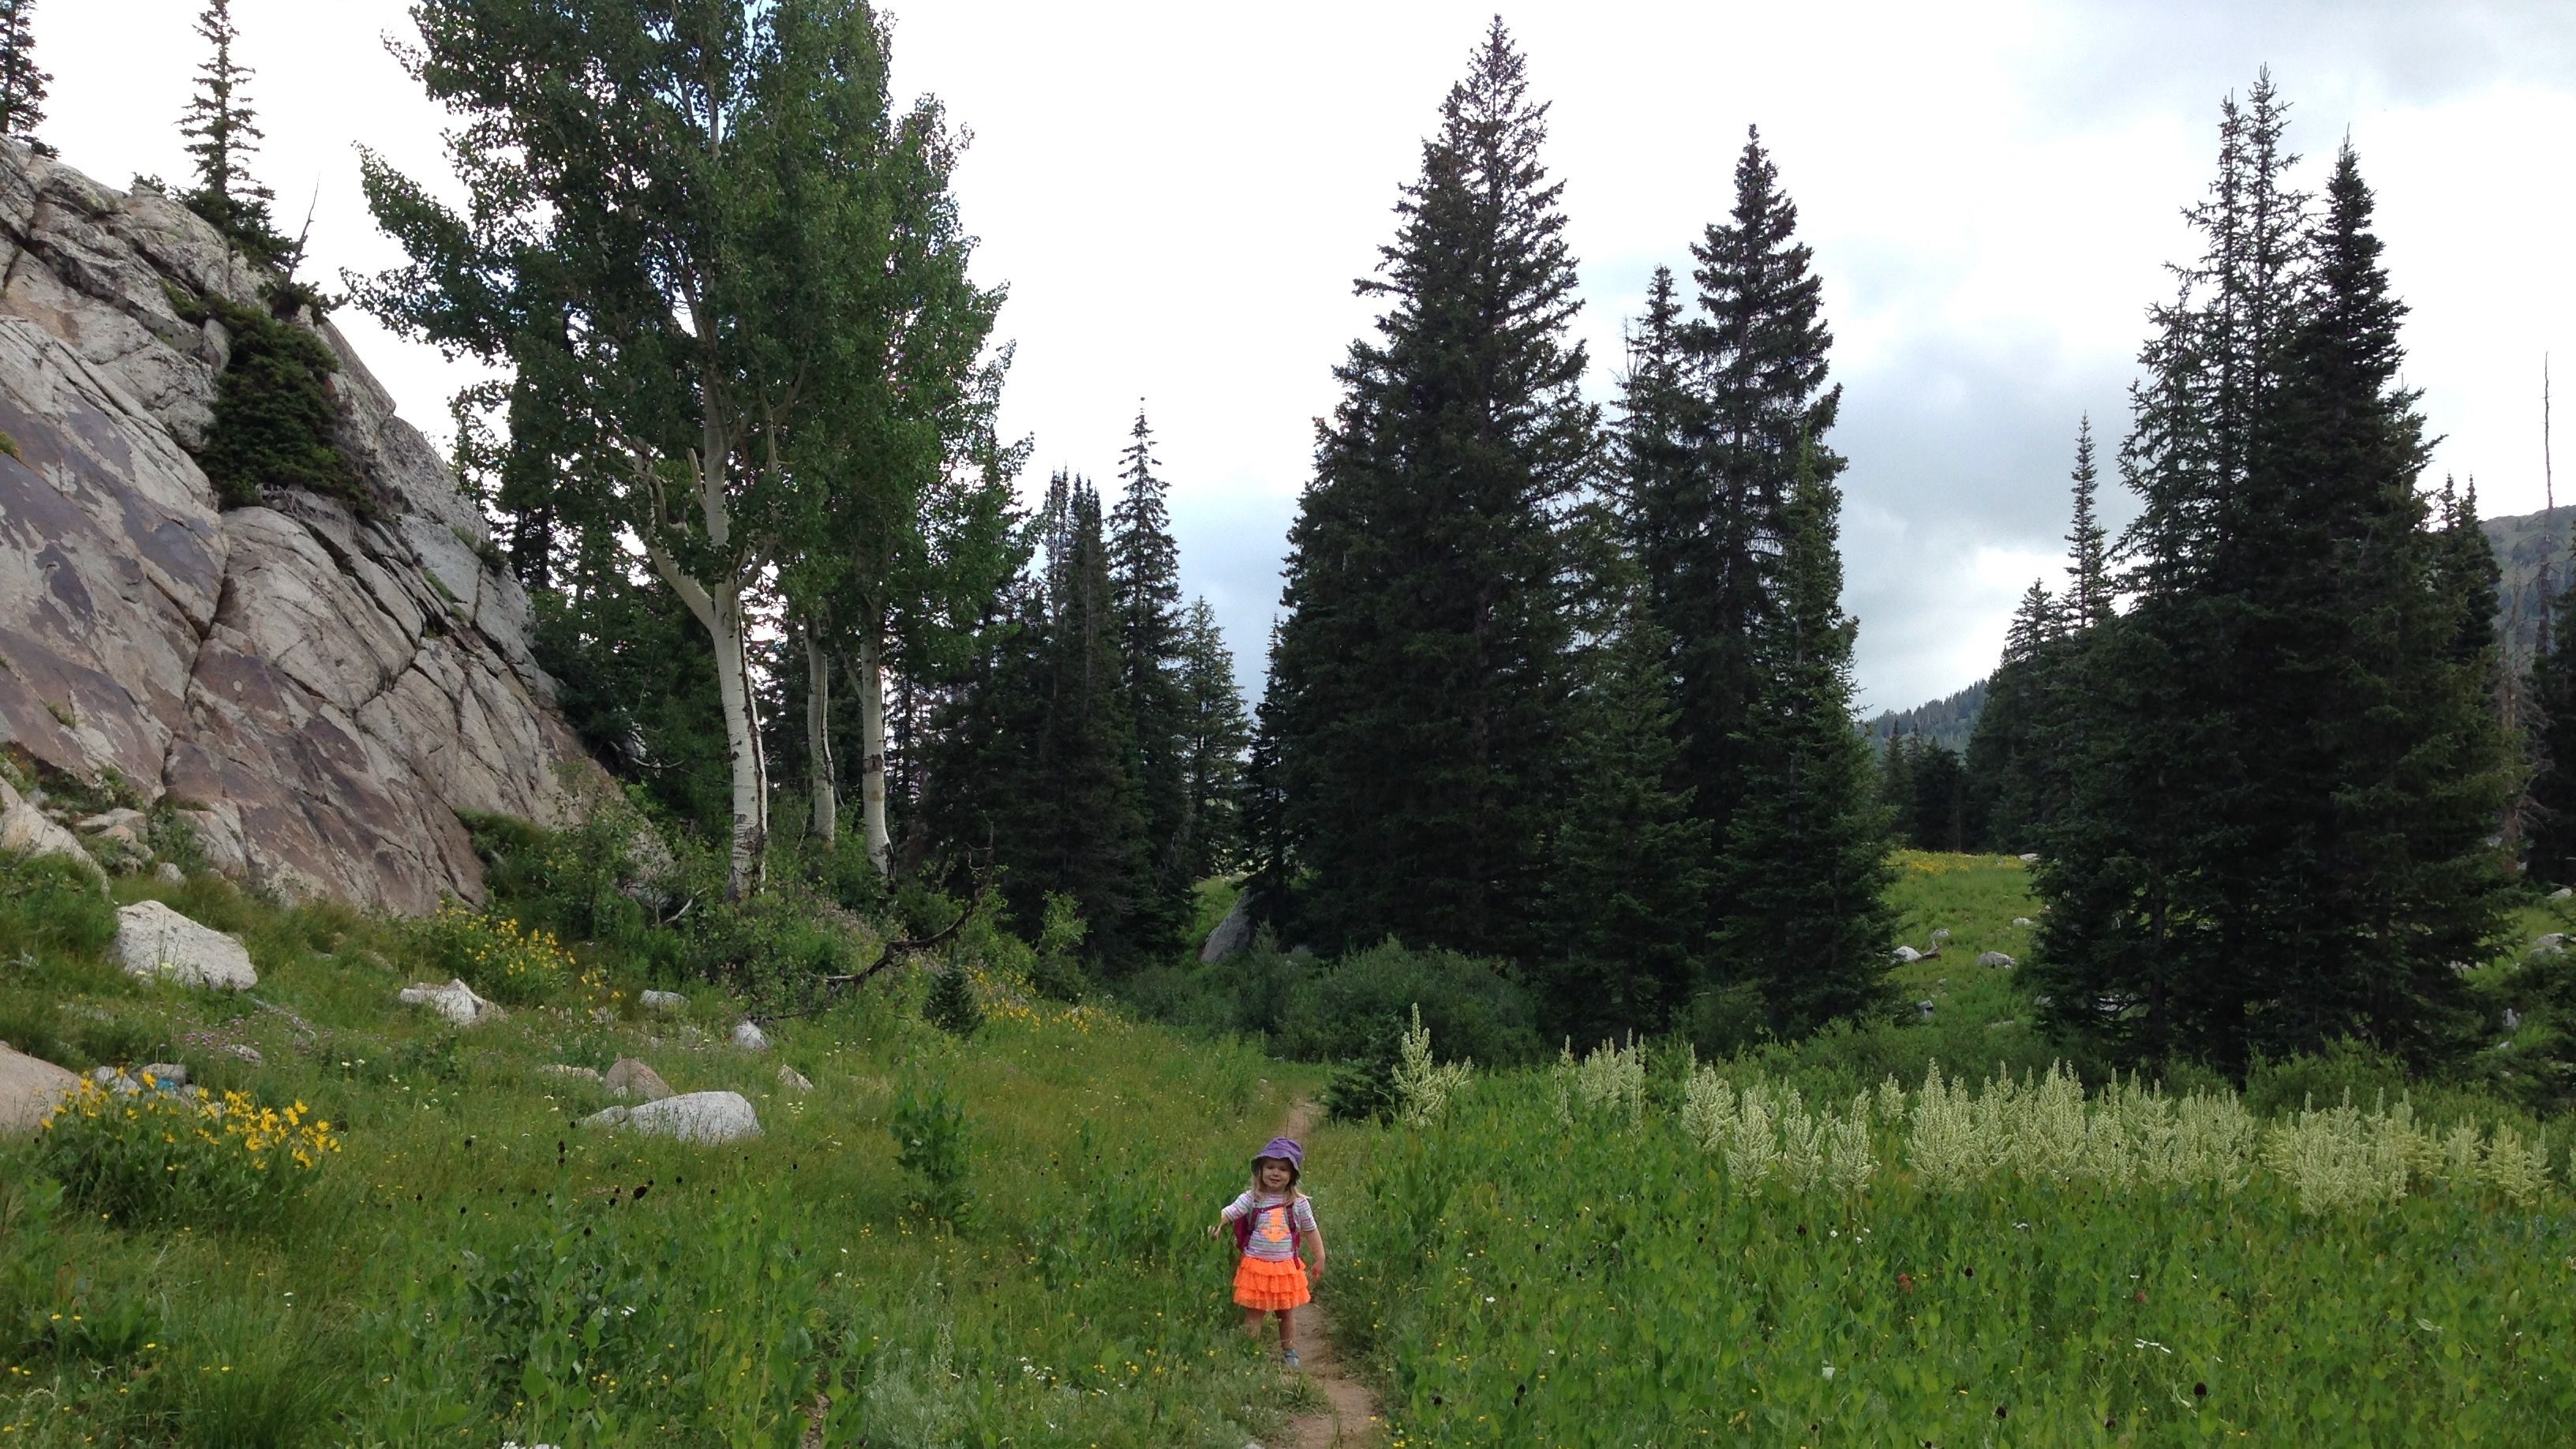 A child walks through a meadow of wildflowers near a cliff.